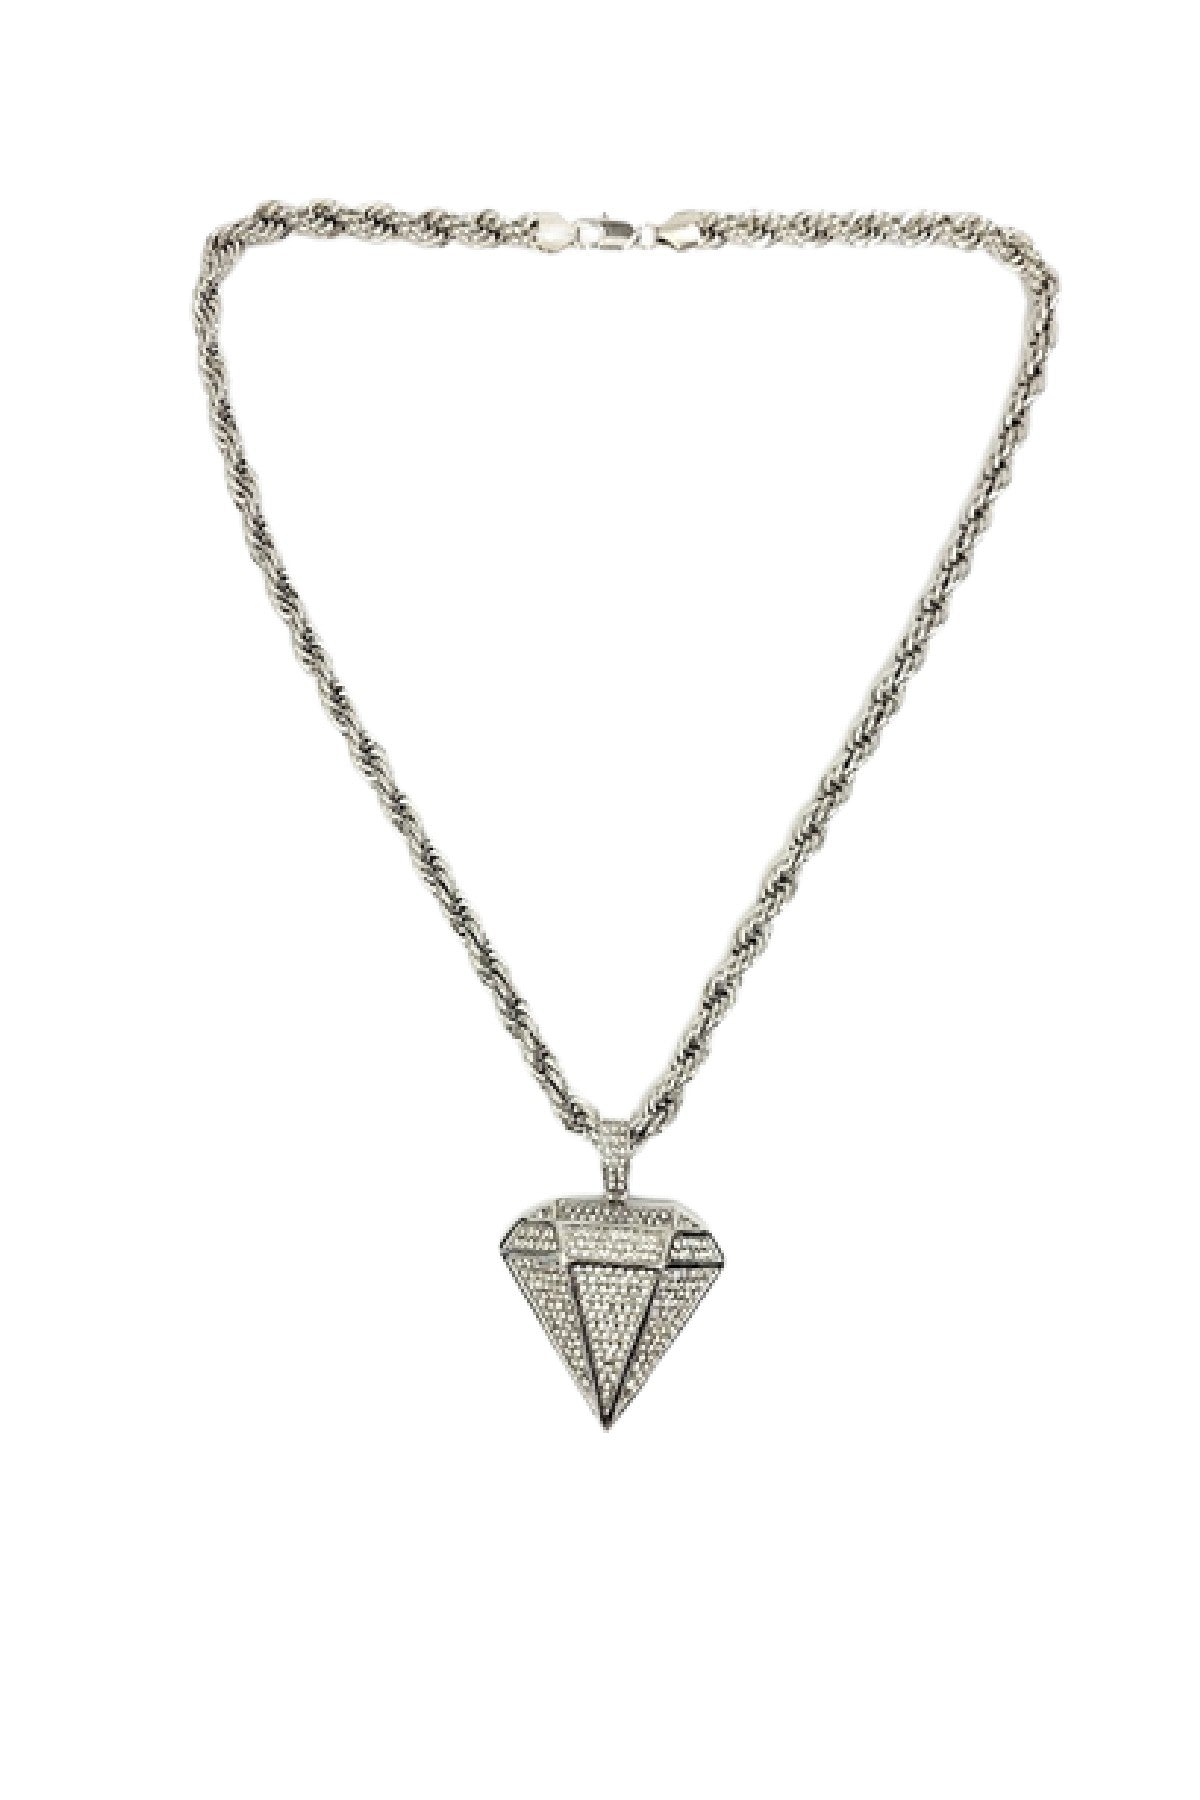 HIP HOP ICED OUT DIAMOND PENDANT ROPE CHAIN